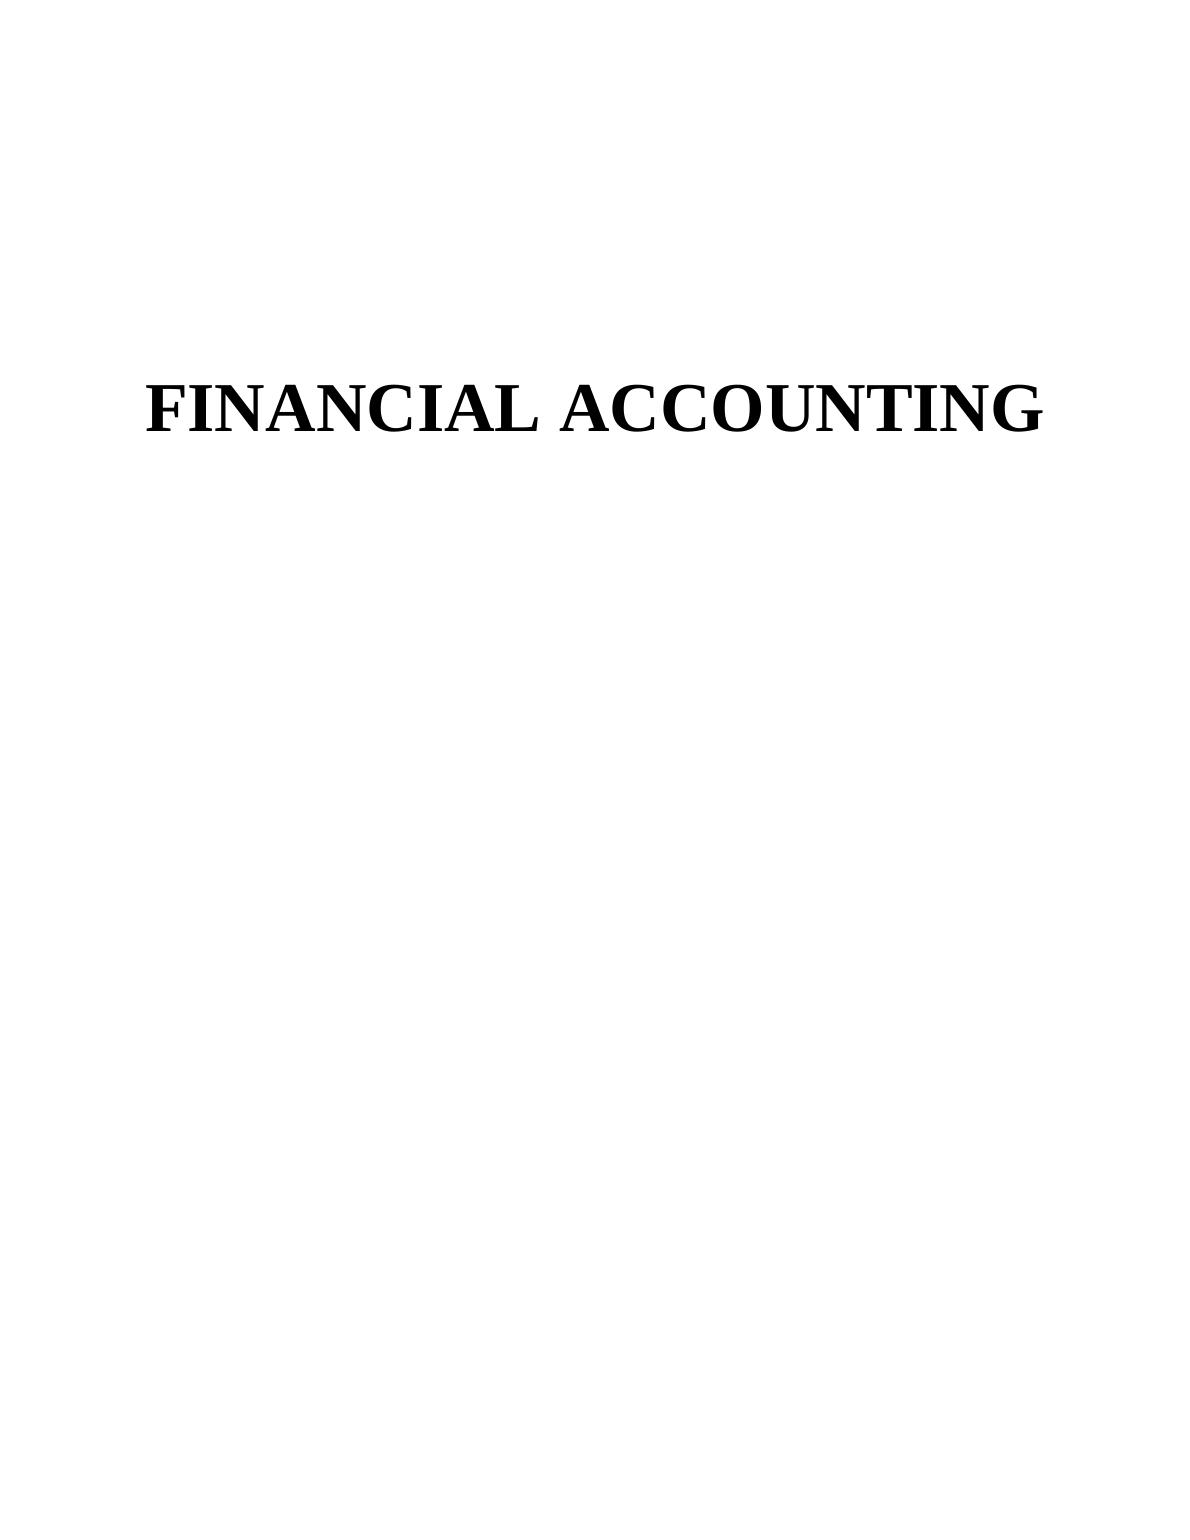 A Study on Financial Accounting Concepts in Business Organization_1